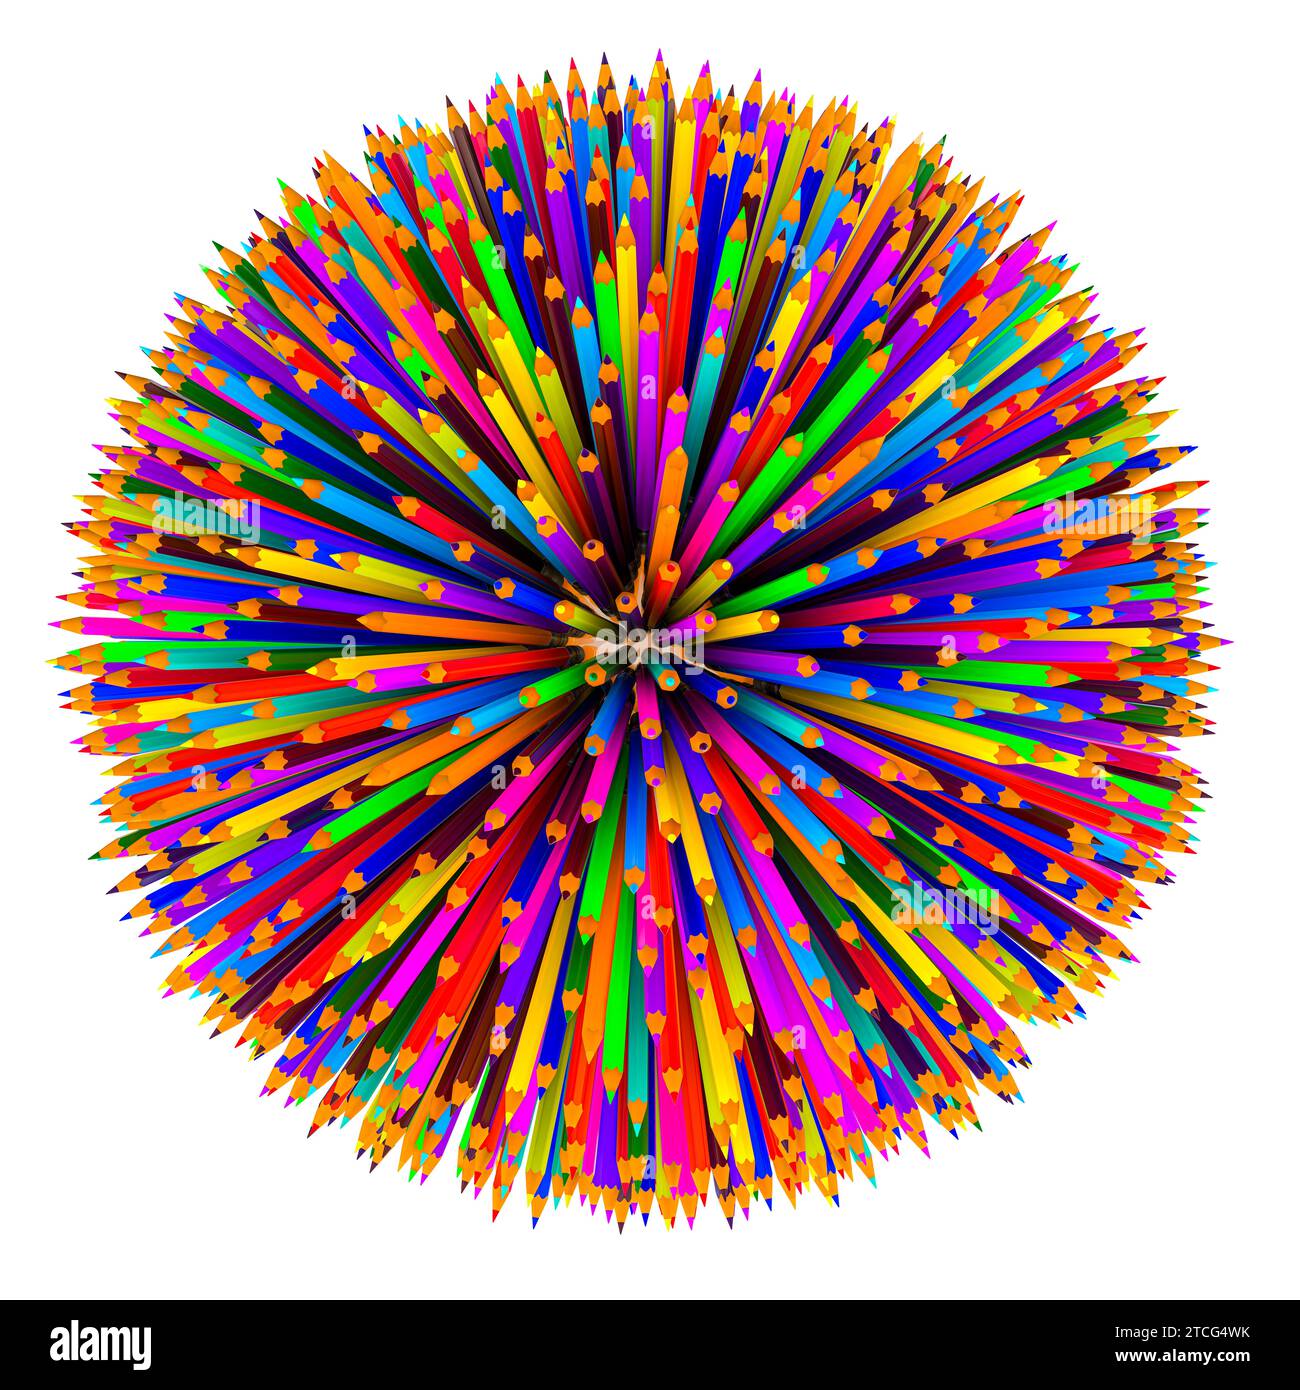 Sphere from colored pencils, 3D rendering isolated on white background Stock Photo